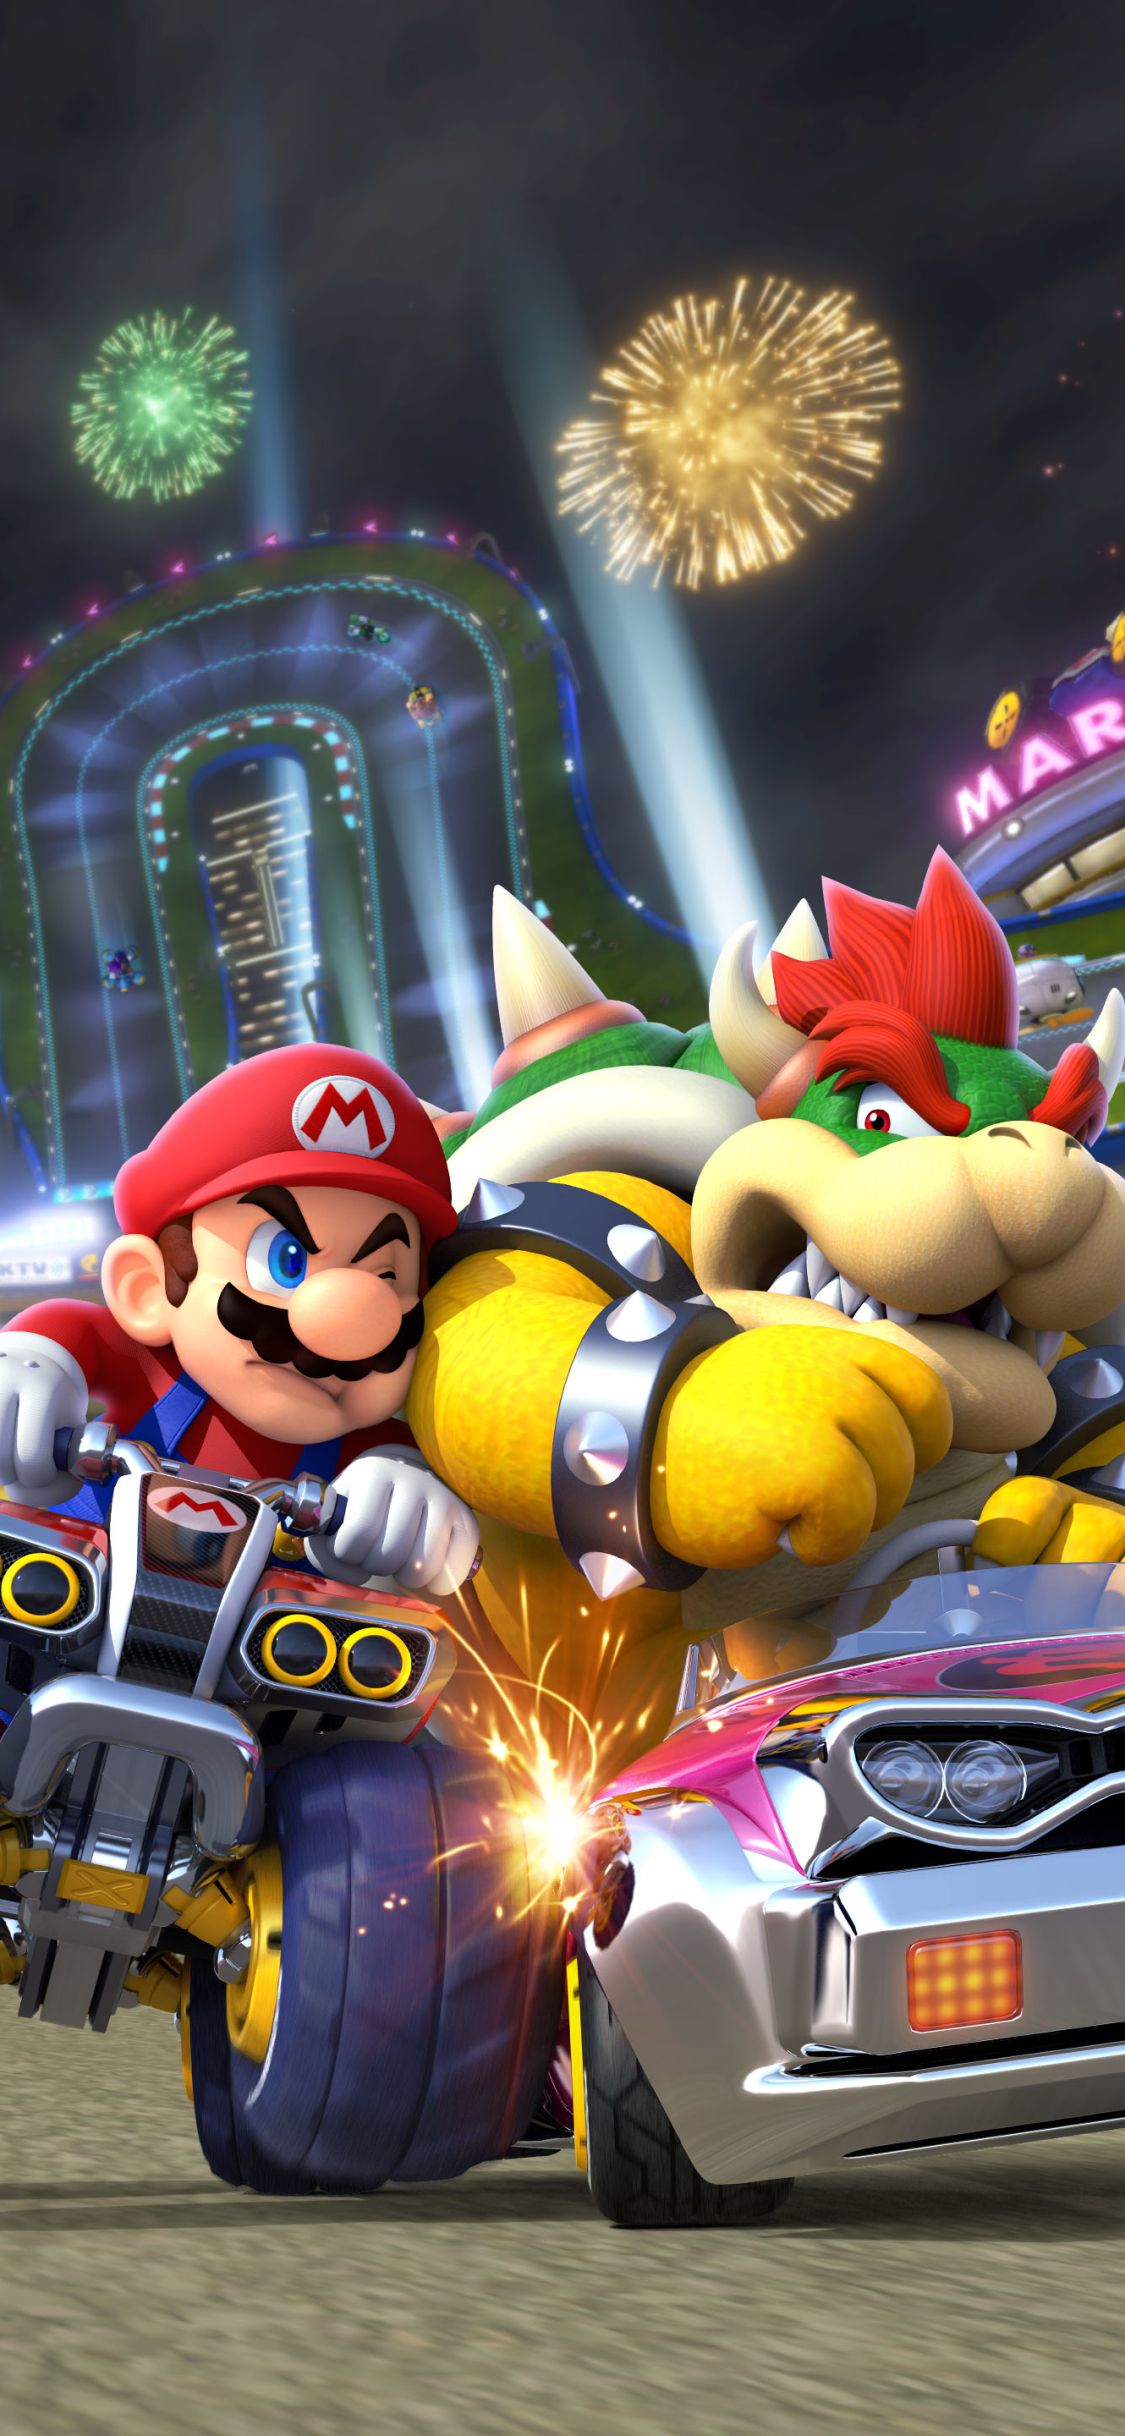 Mobile wallpaper: Mario, Video Game, Mario Kart 1135462 download the picture for free